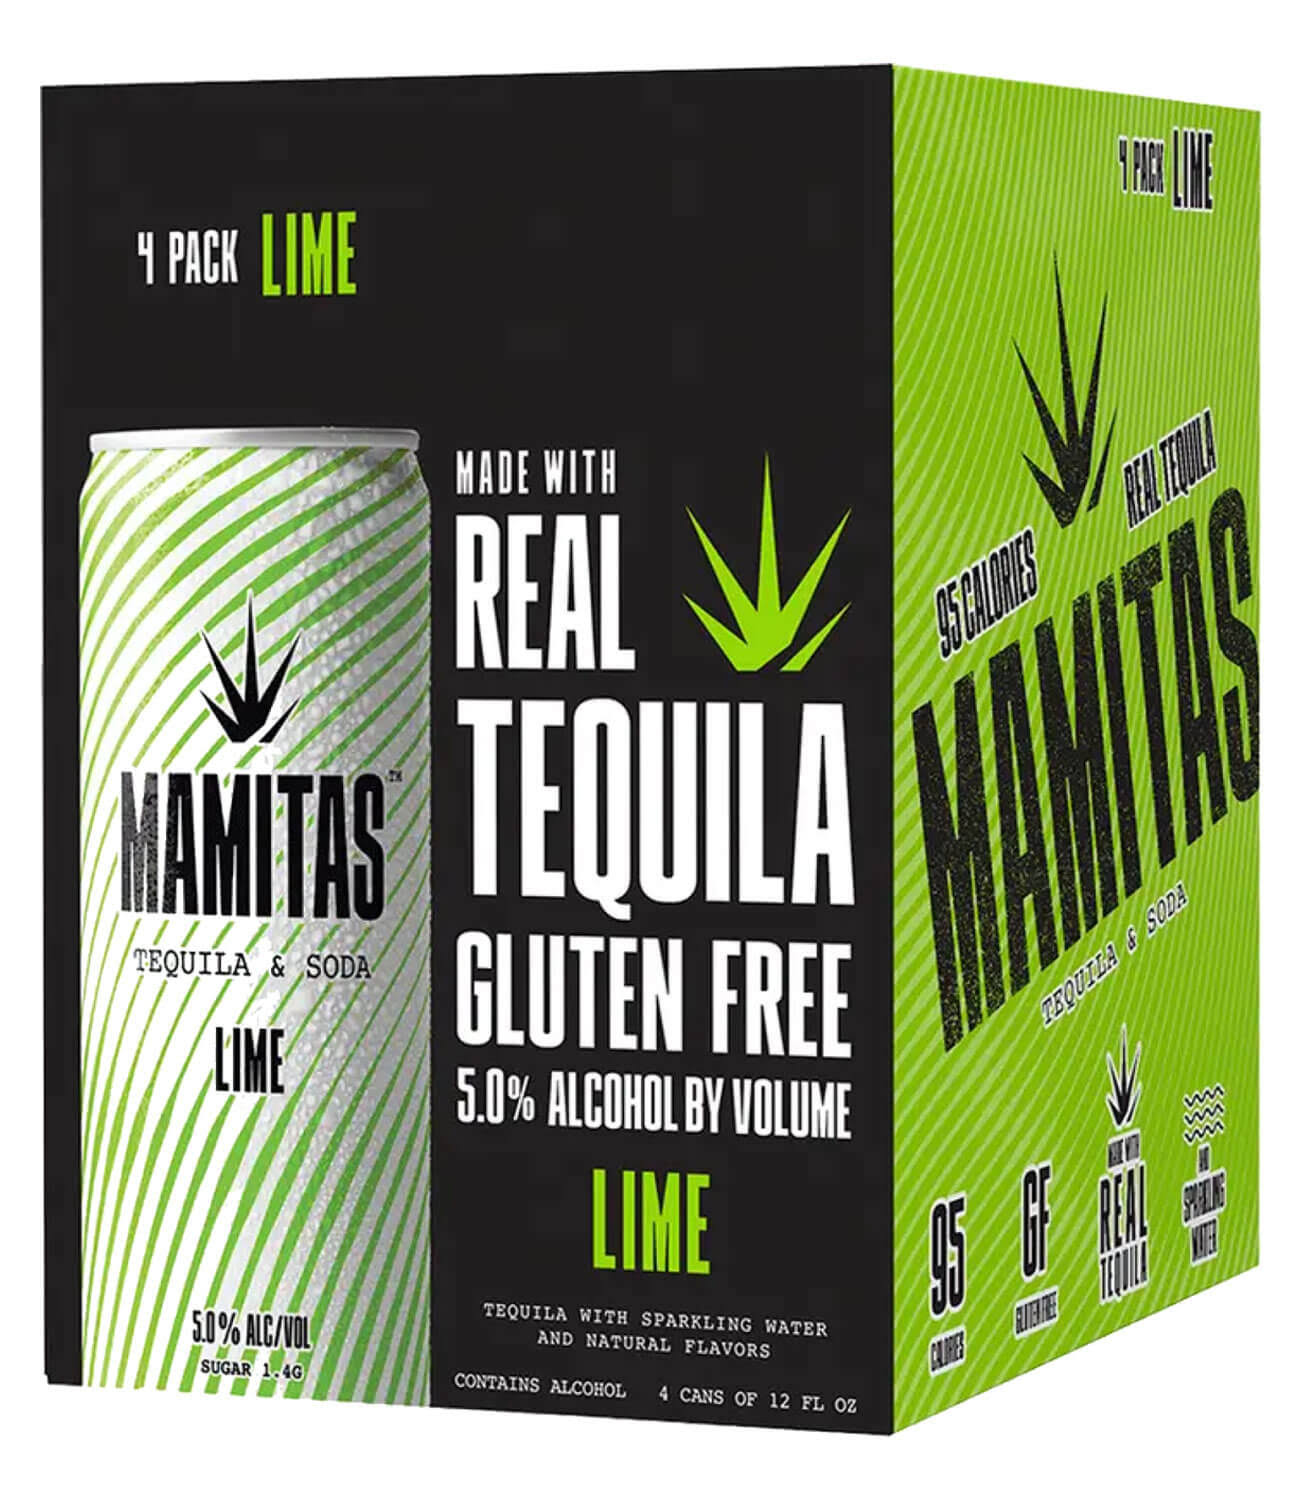 Mamitas Tequila & Soda, Lime, 4 Pack - 4 pack, 12 fl oz cans